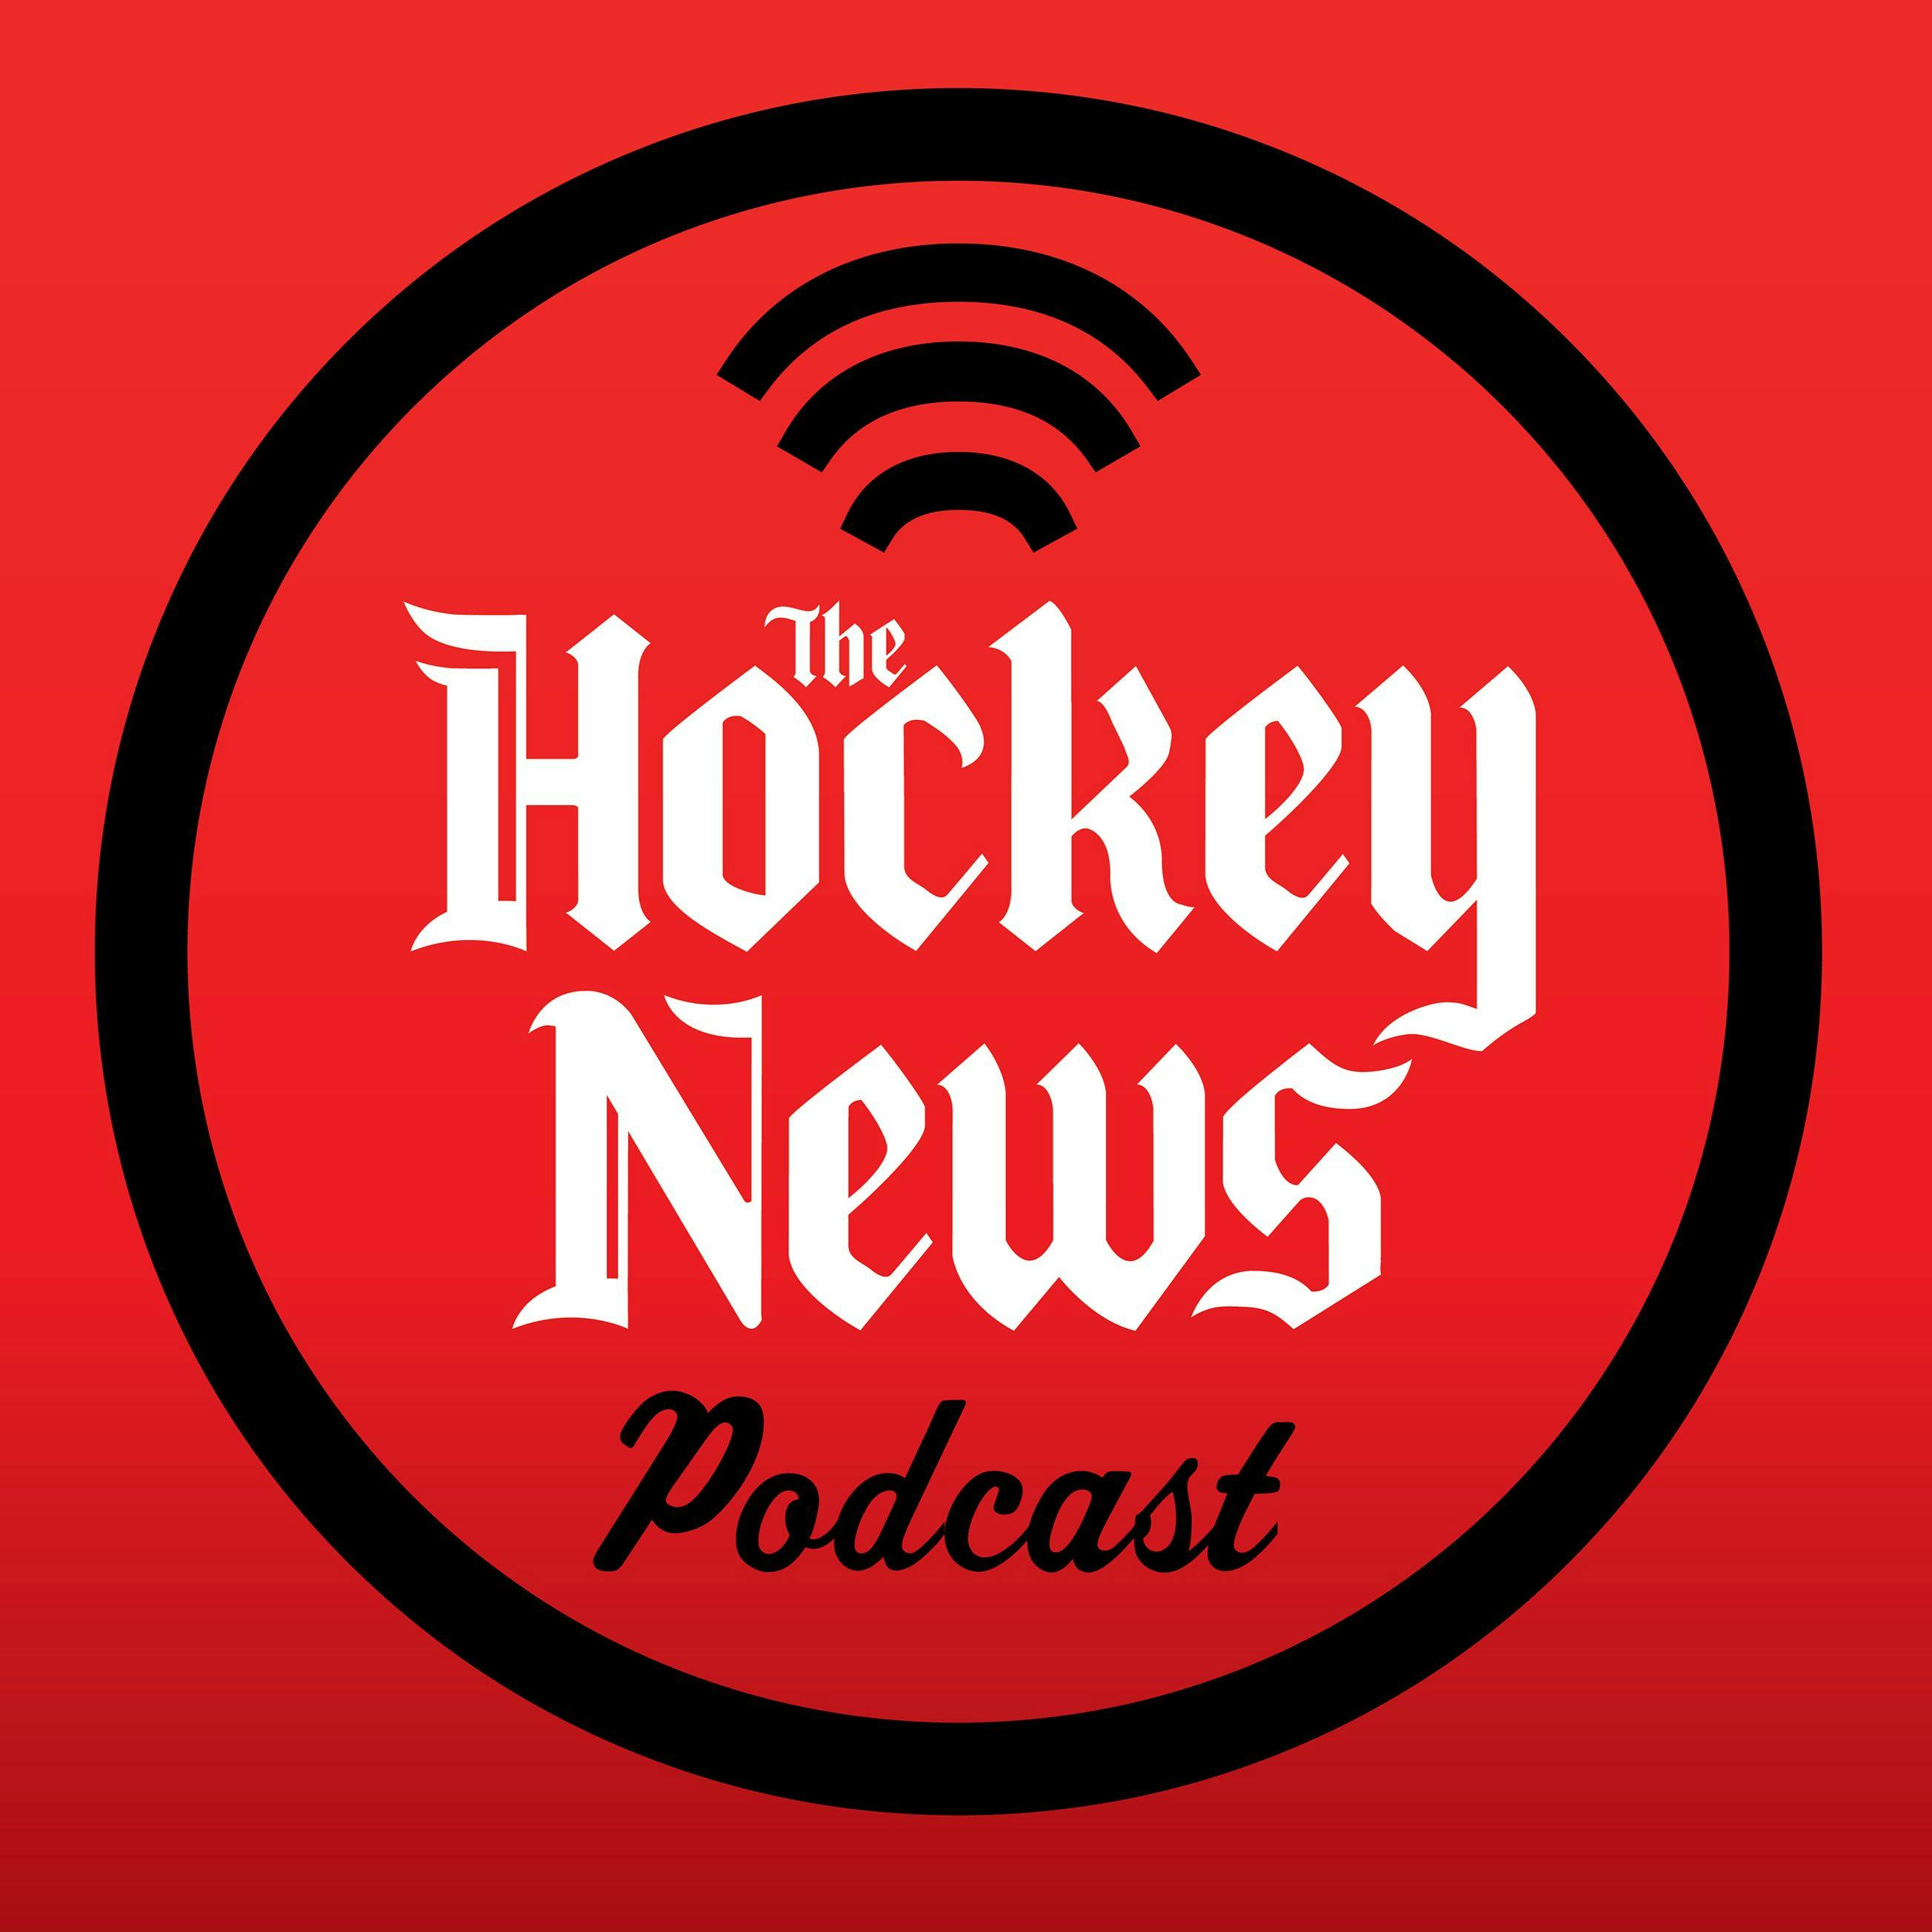 The Hockey News Podcast: This is Where Things Get Interesting